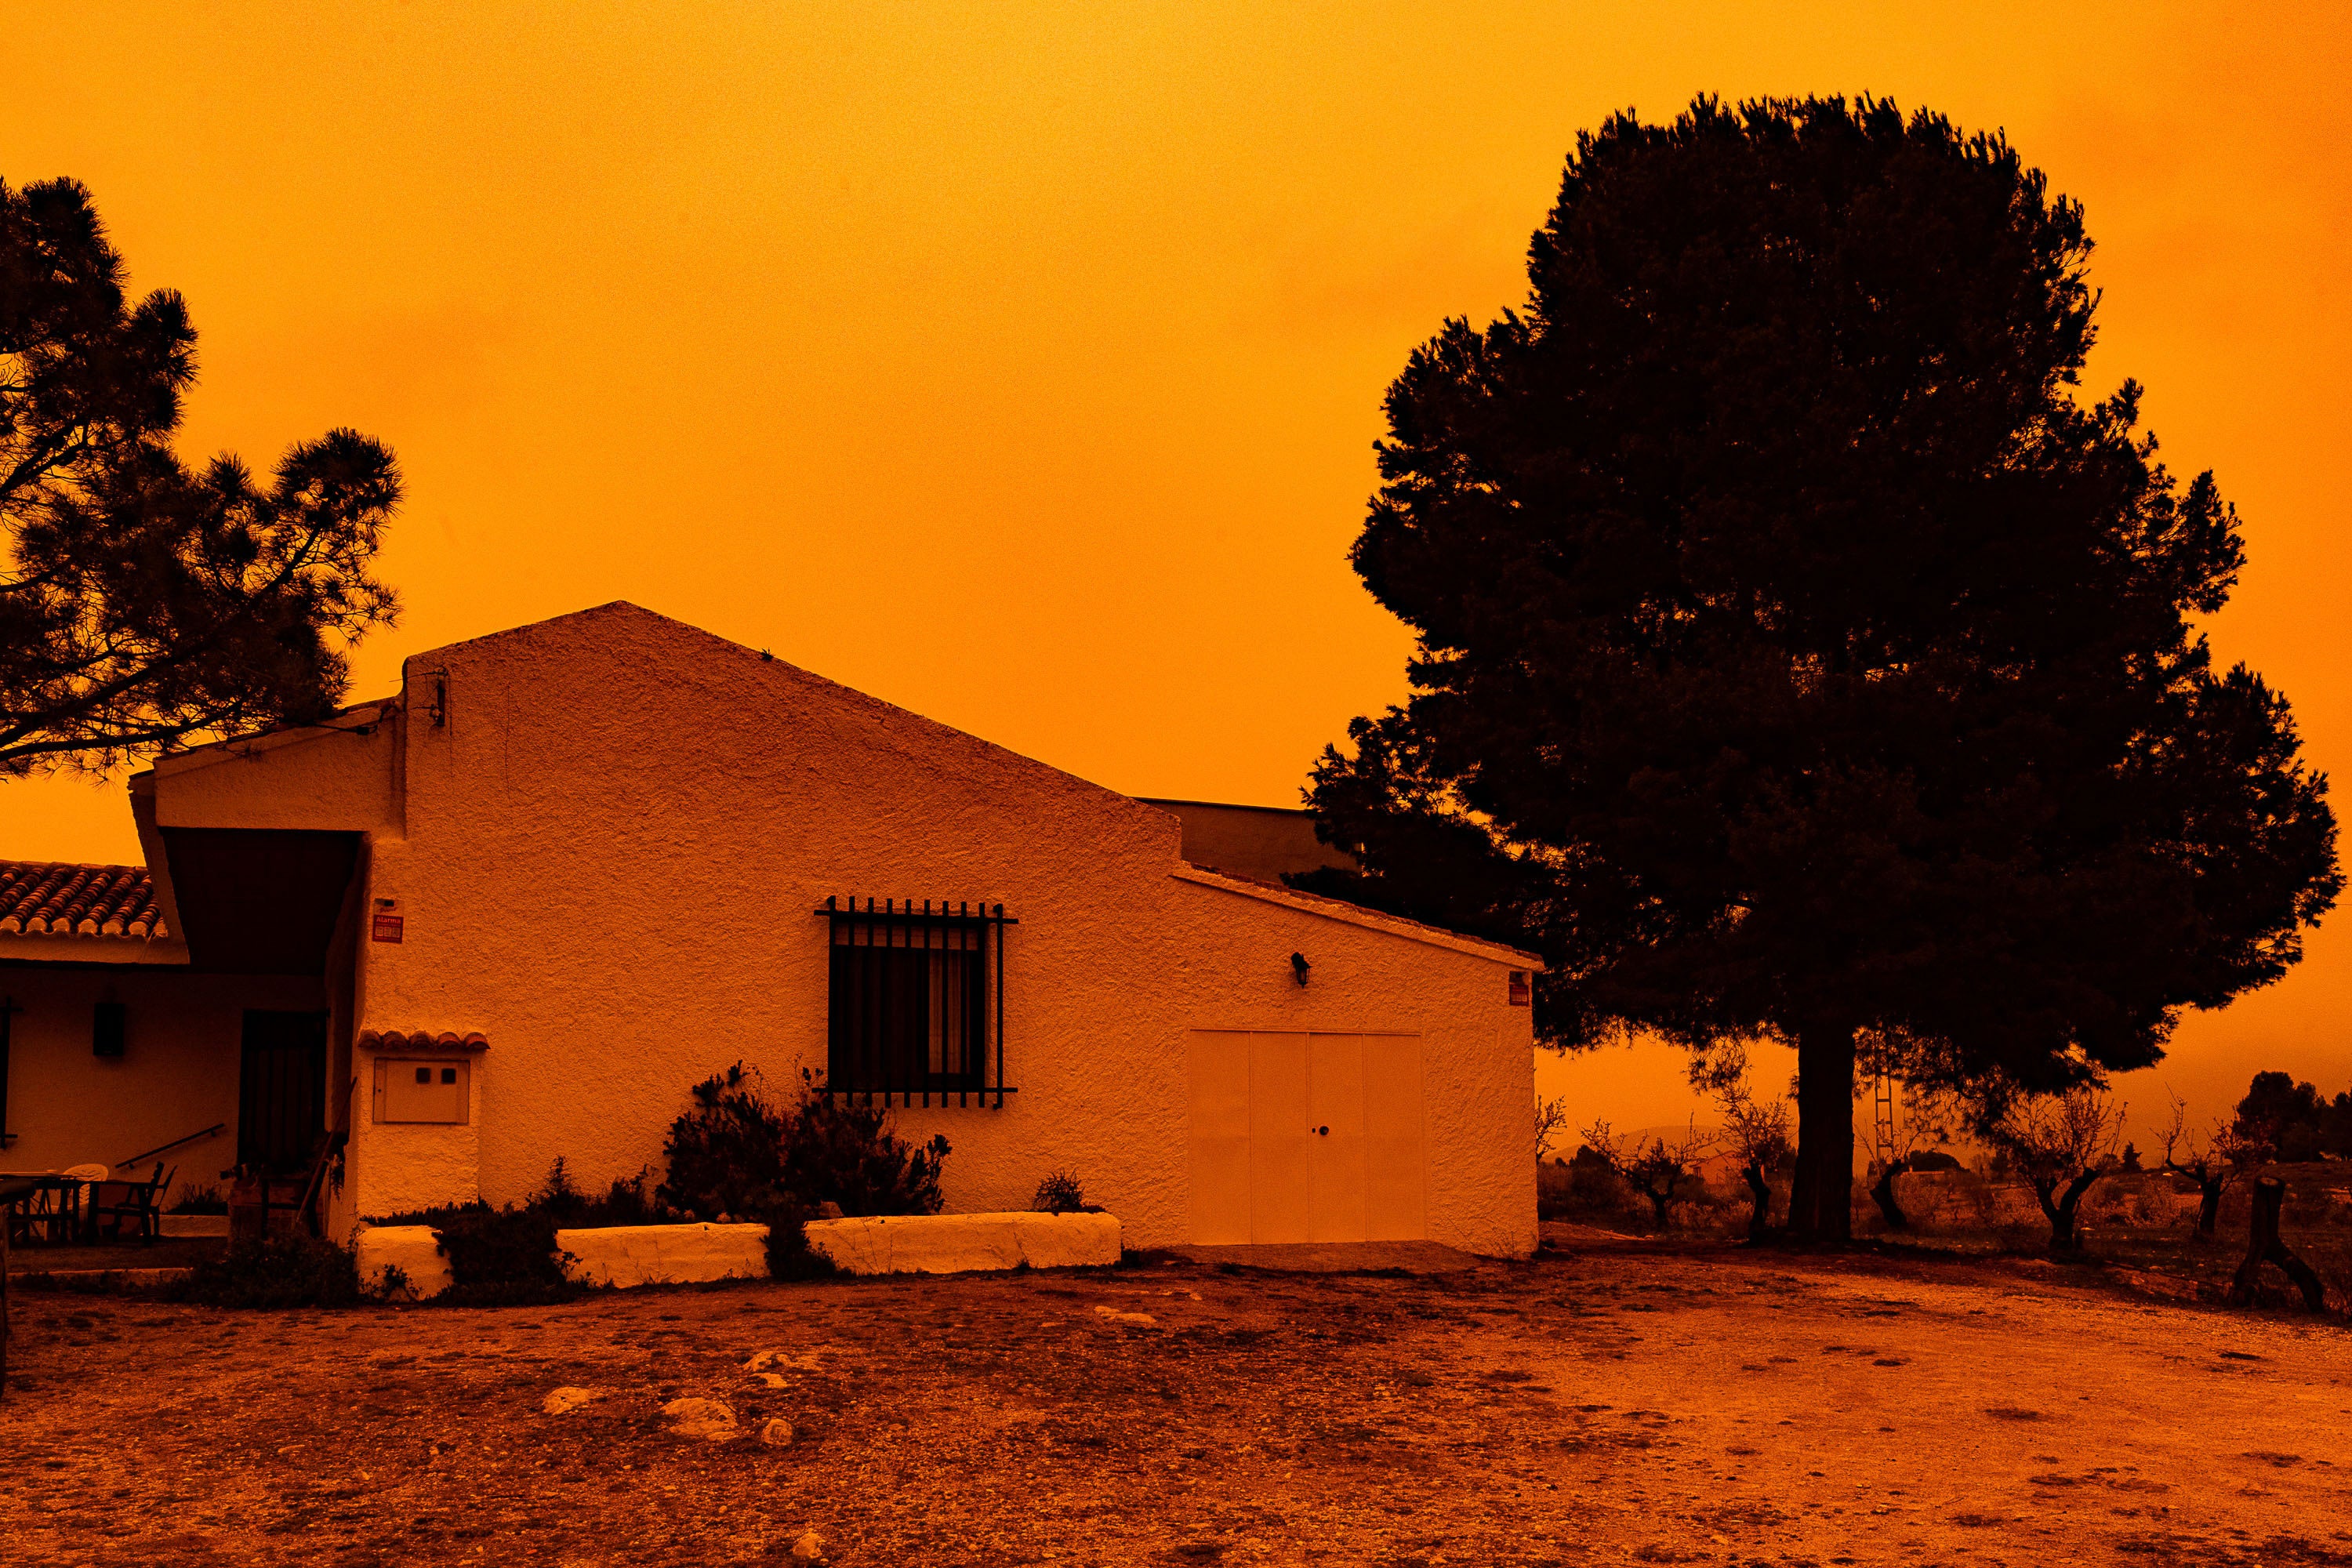 <p>An orange sky is seen over a building in Navares, southeastern Spain on 14 March. A mass of hot air from the Sahara dumped vast amounts of dust after crossing the Mediterranean</p>